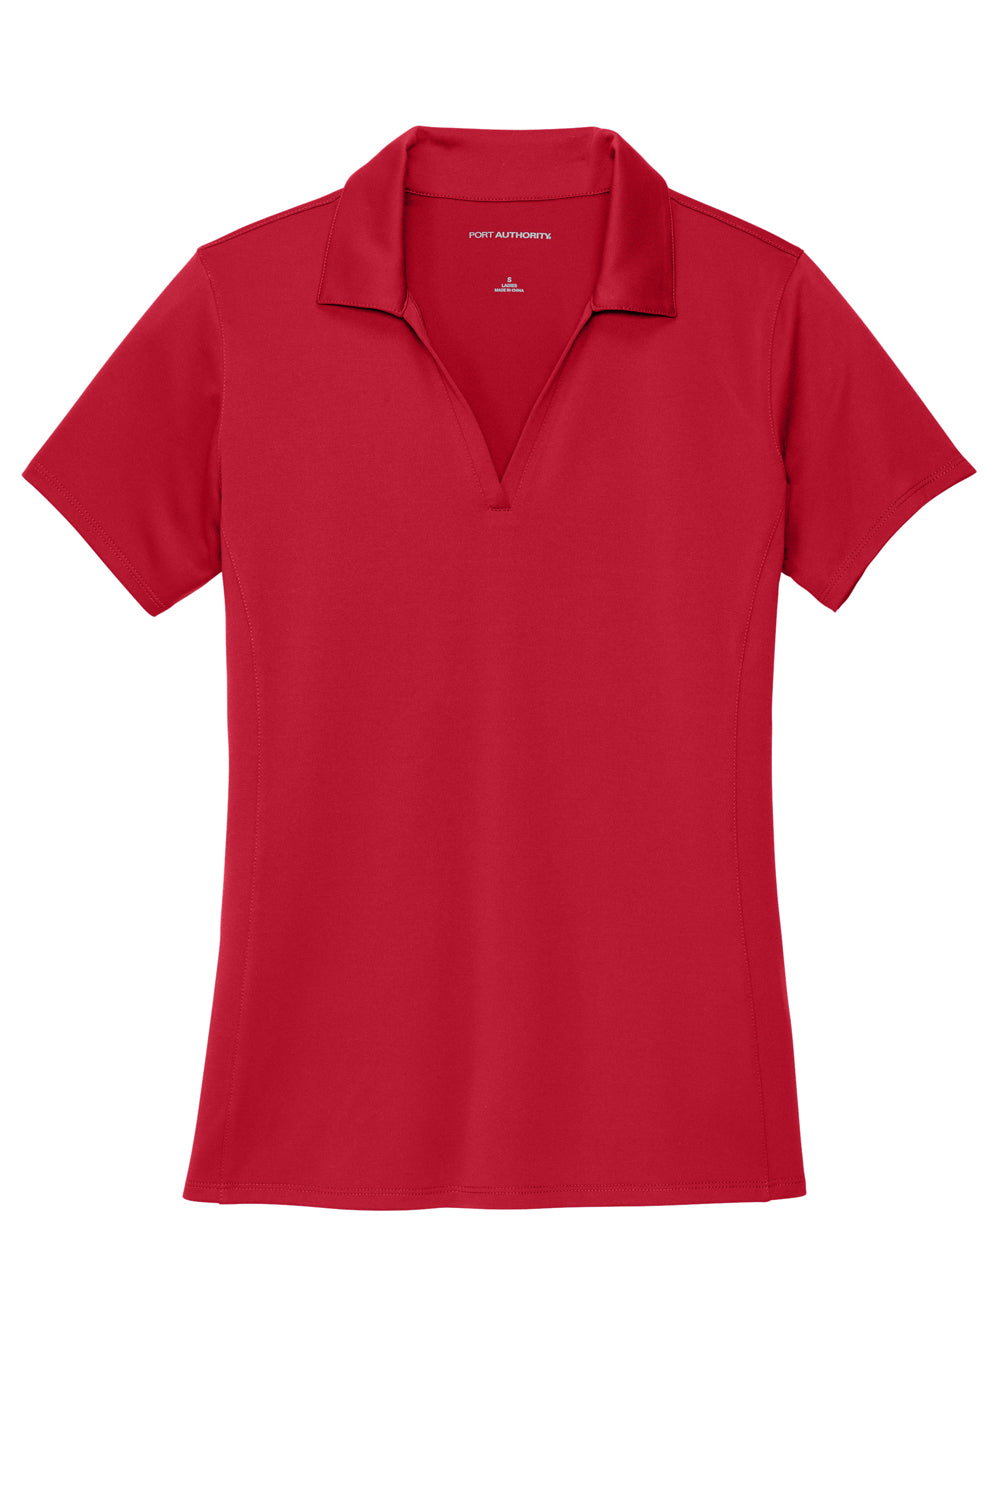 Port Authority LK398 Performance Staff Short Sleeve Polo Shirt Engine Red Flat Front